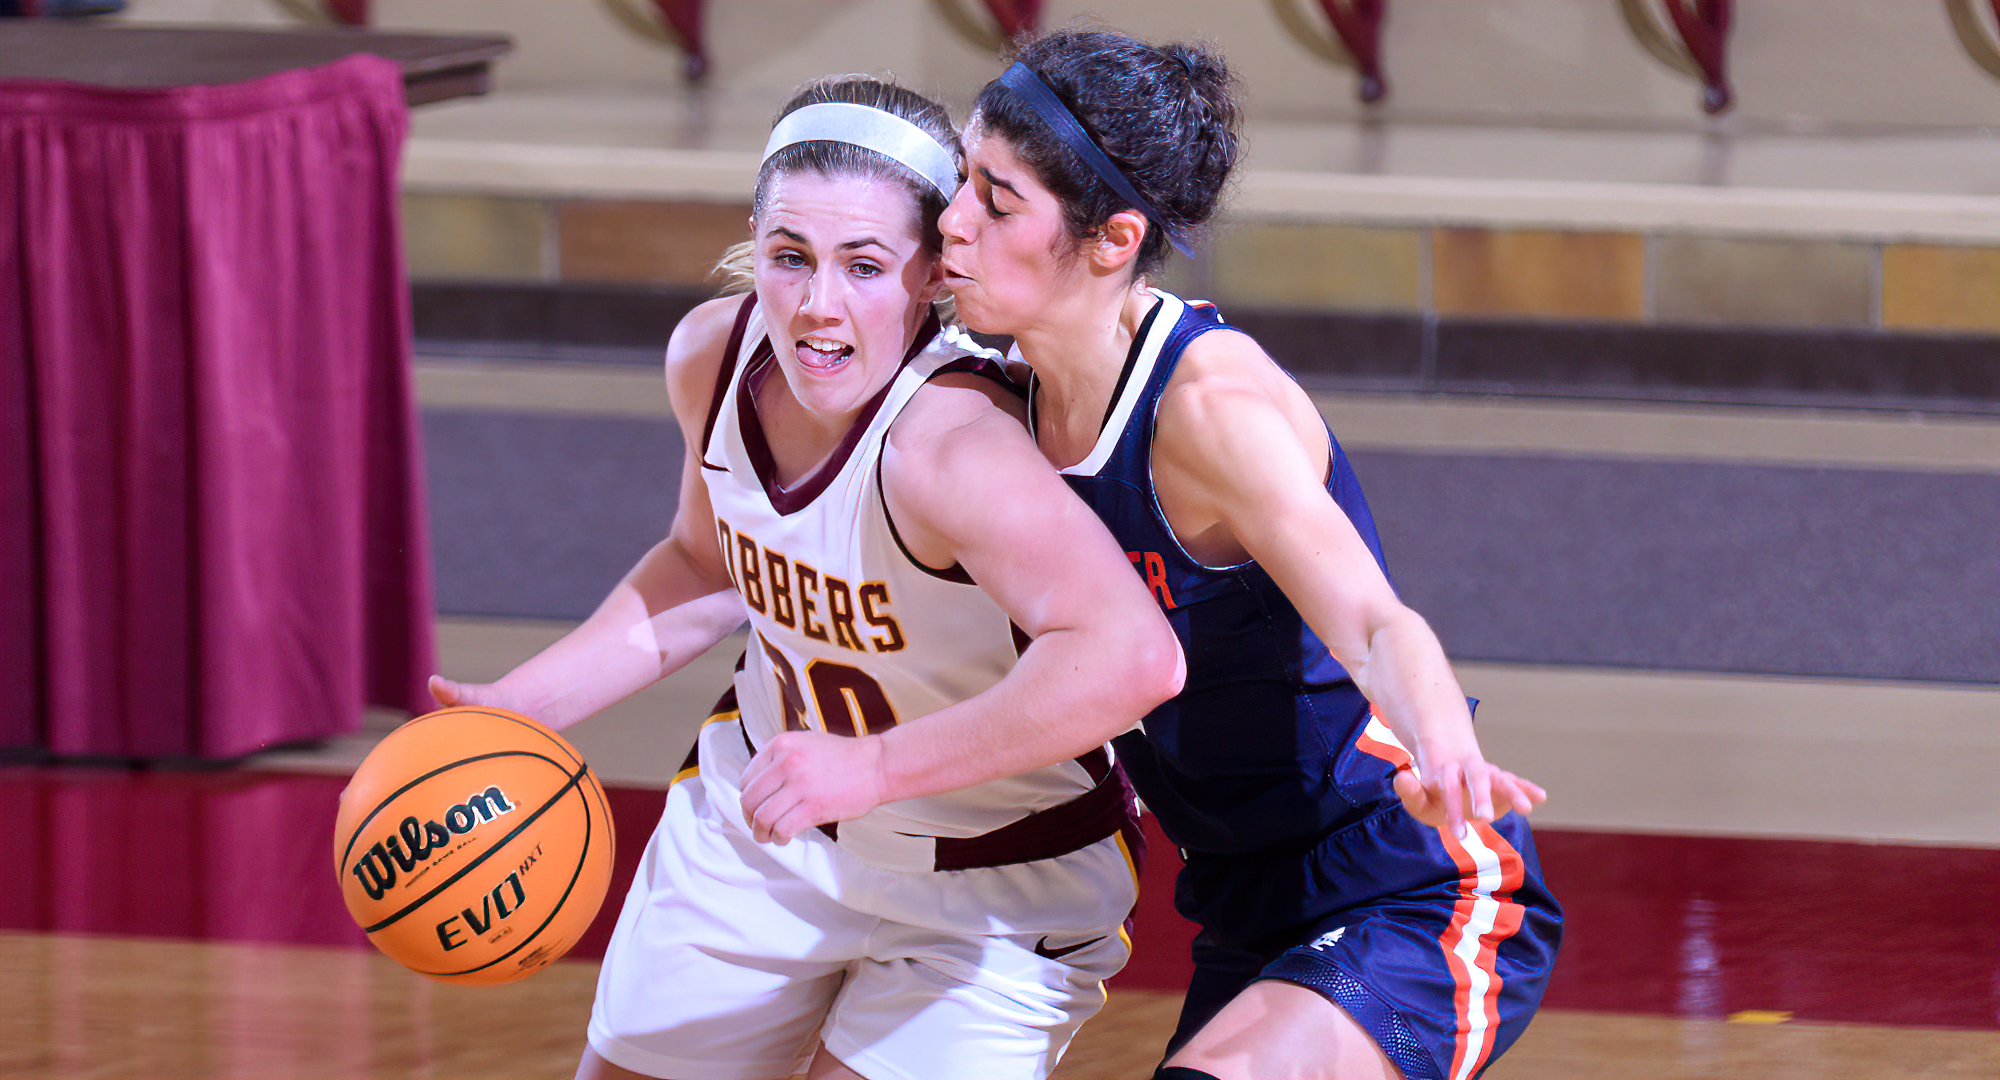 Emily Beseman drives by a Macalester defender during the second quarter in the Cobbers' game with the Scots. Beseman had a team-high 17 points.